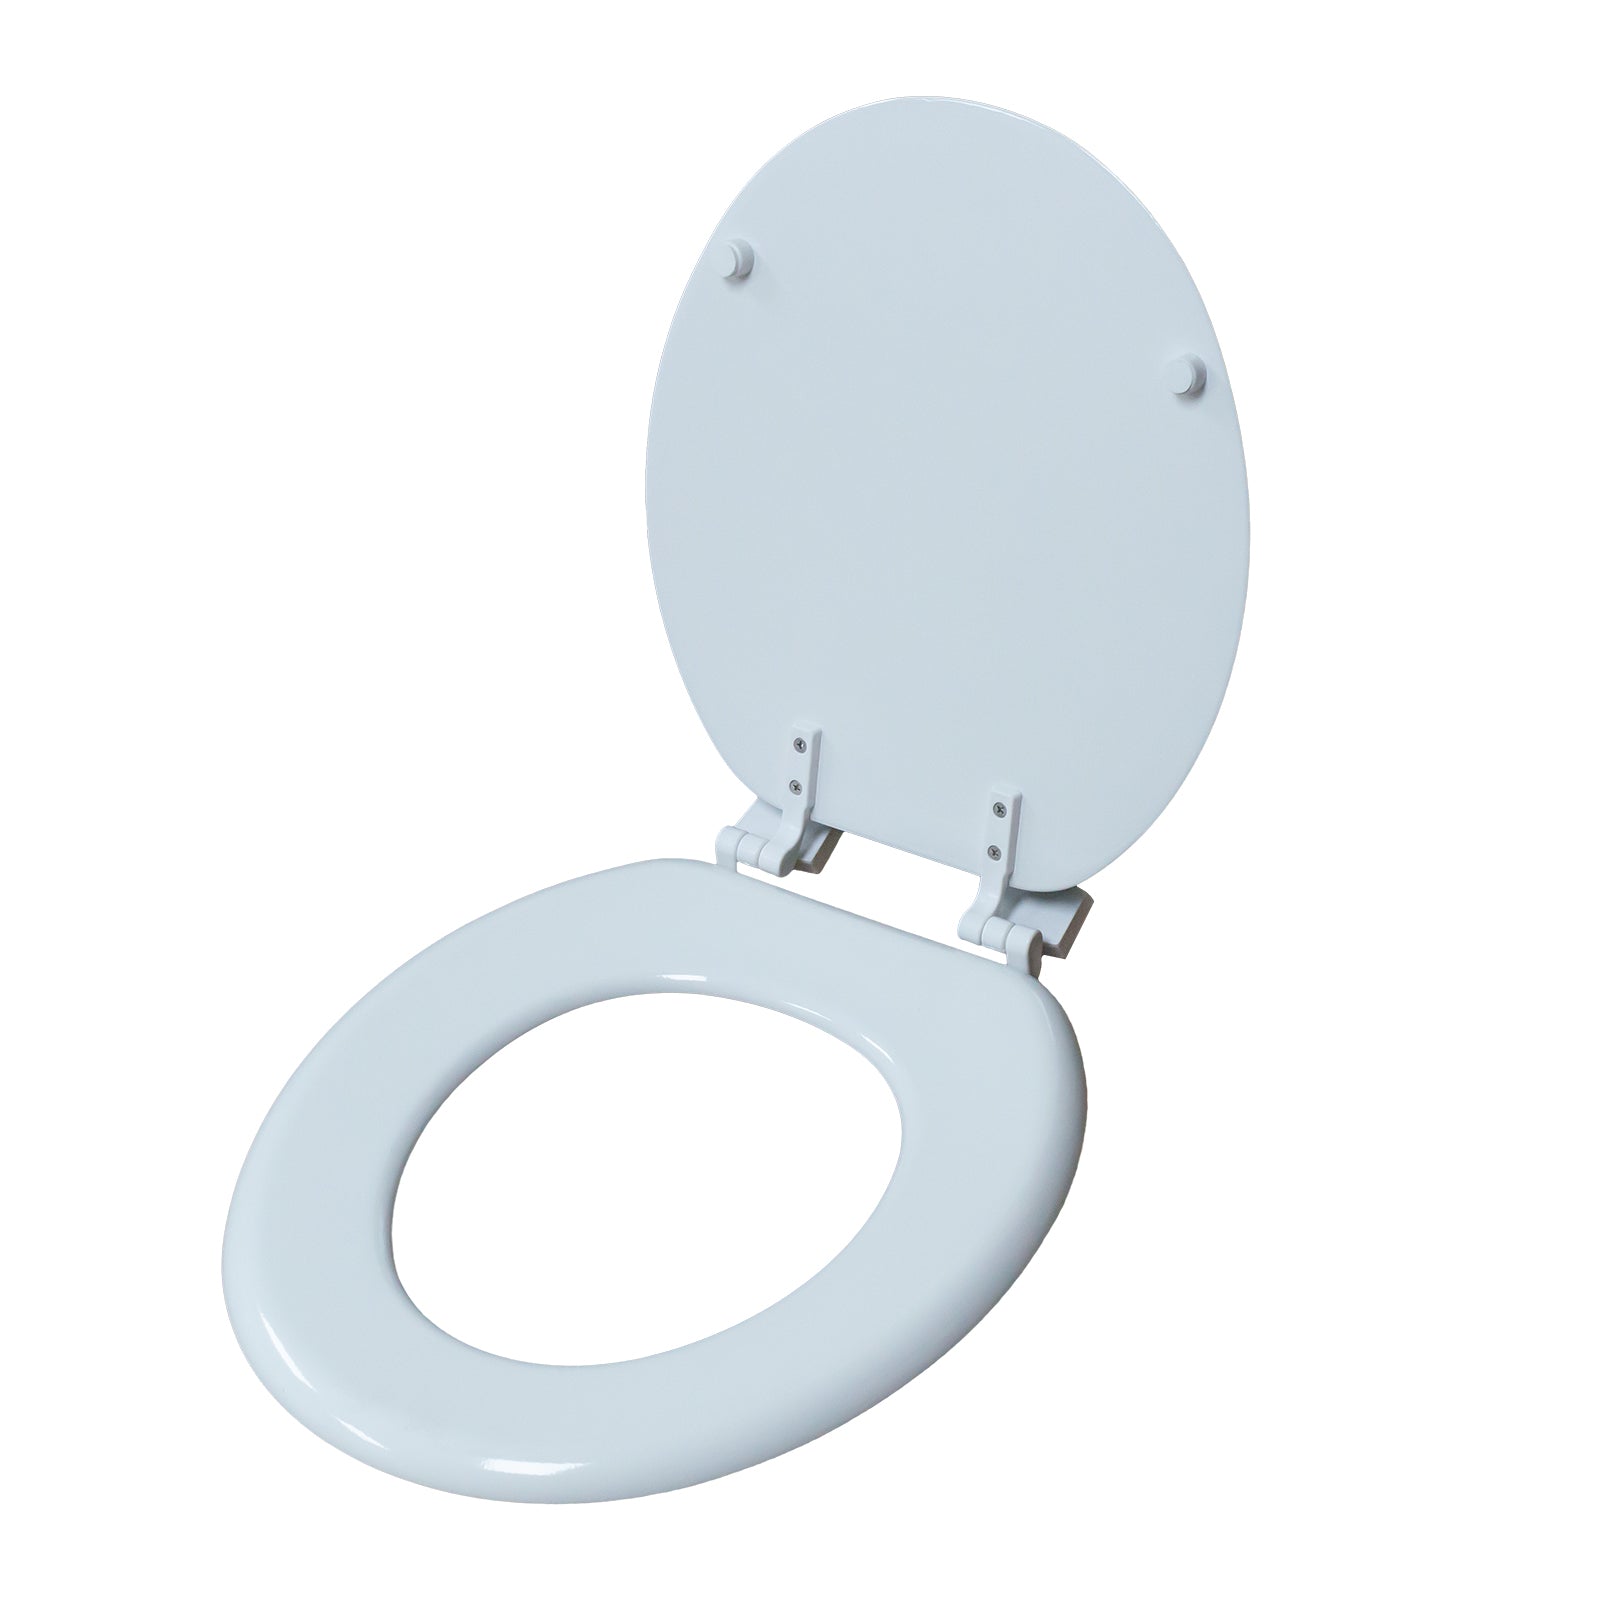 3 in 1 Classic Oval Shaped Design White Toilet Seat, Paper Holder and Pine Brush Holder